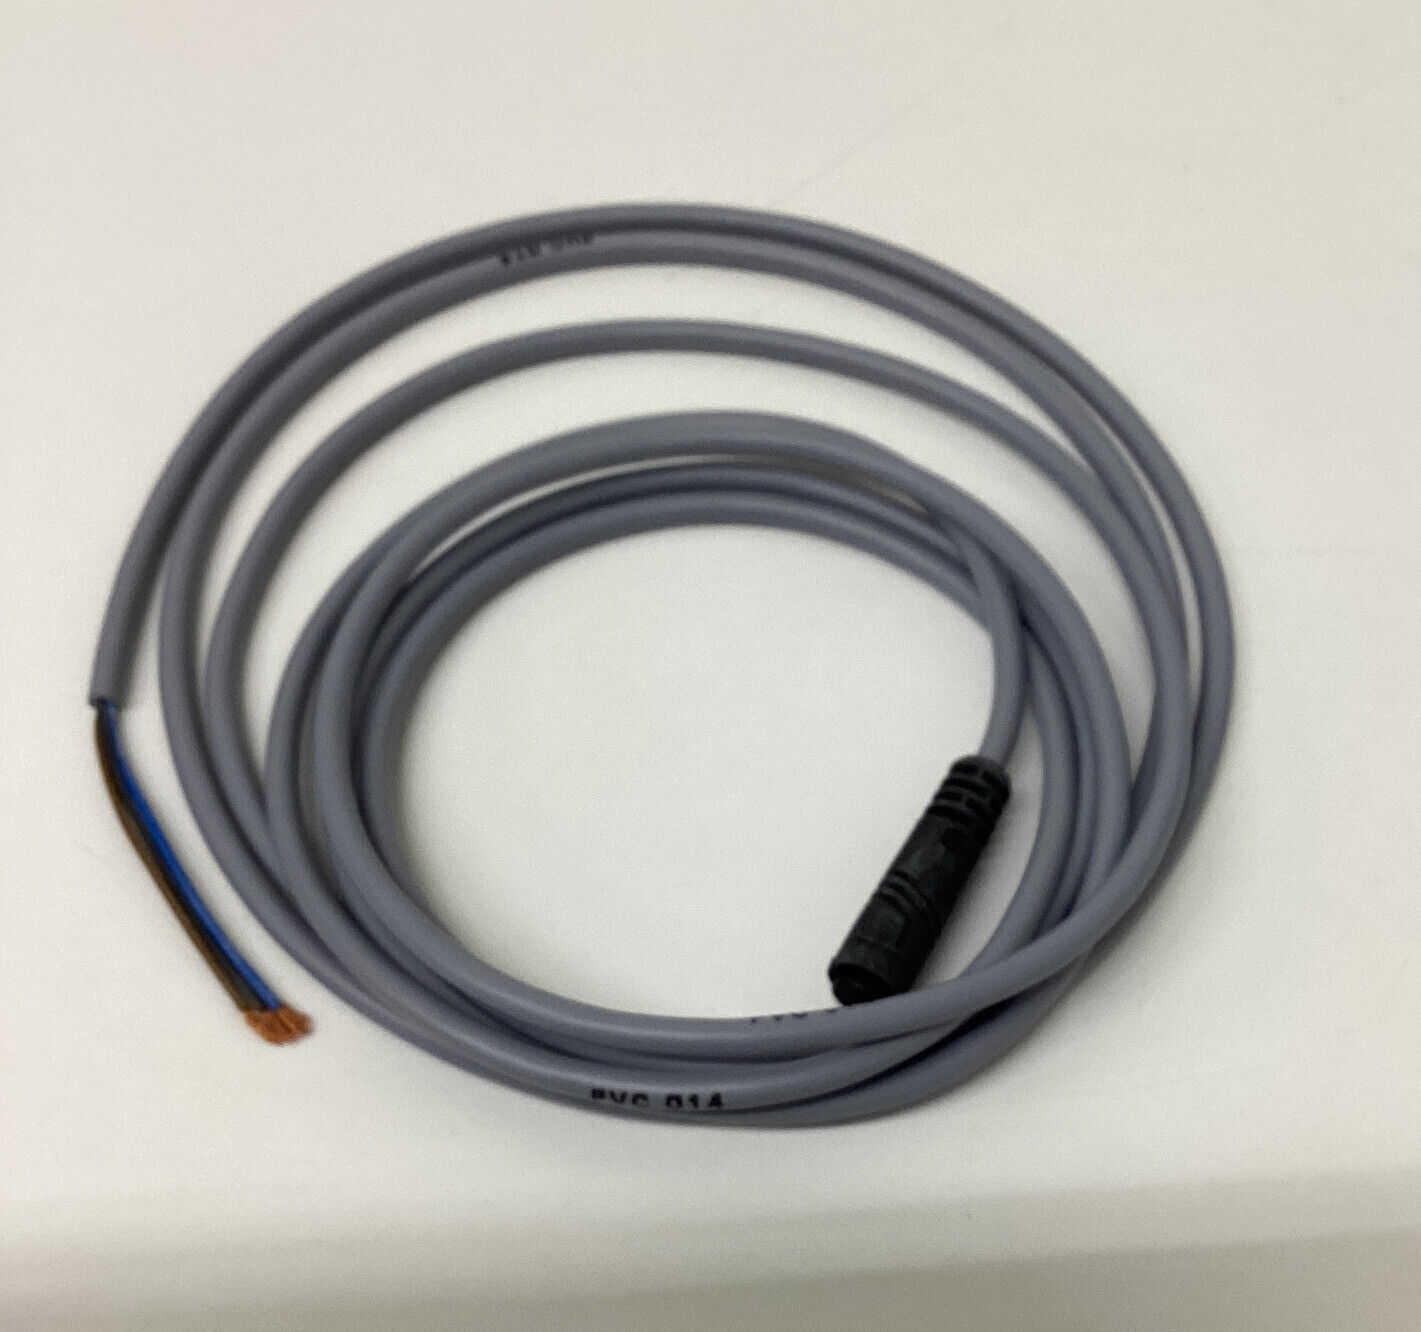 Phd  17533-00-02  3- Pin Wire Cordset  (CL260) - 0